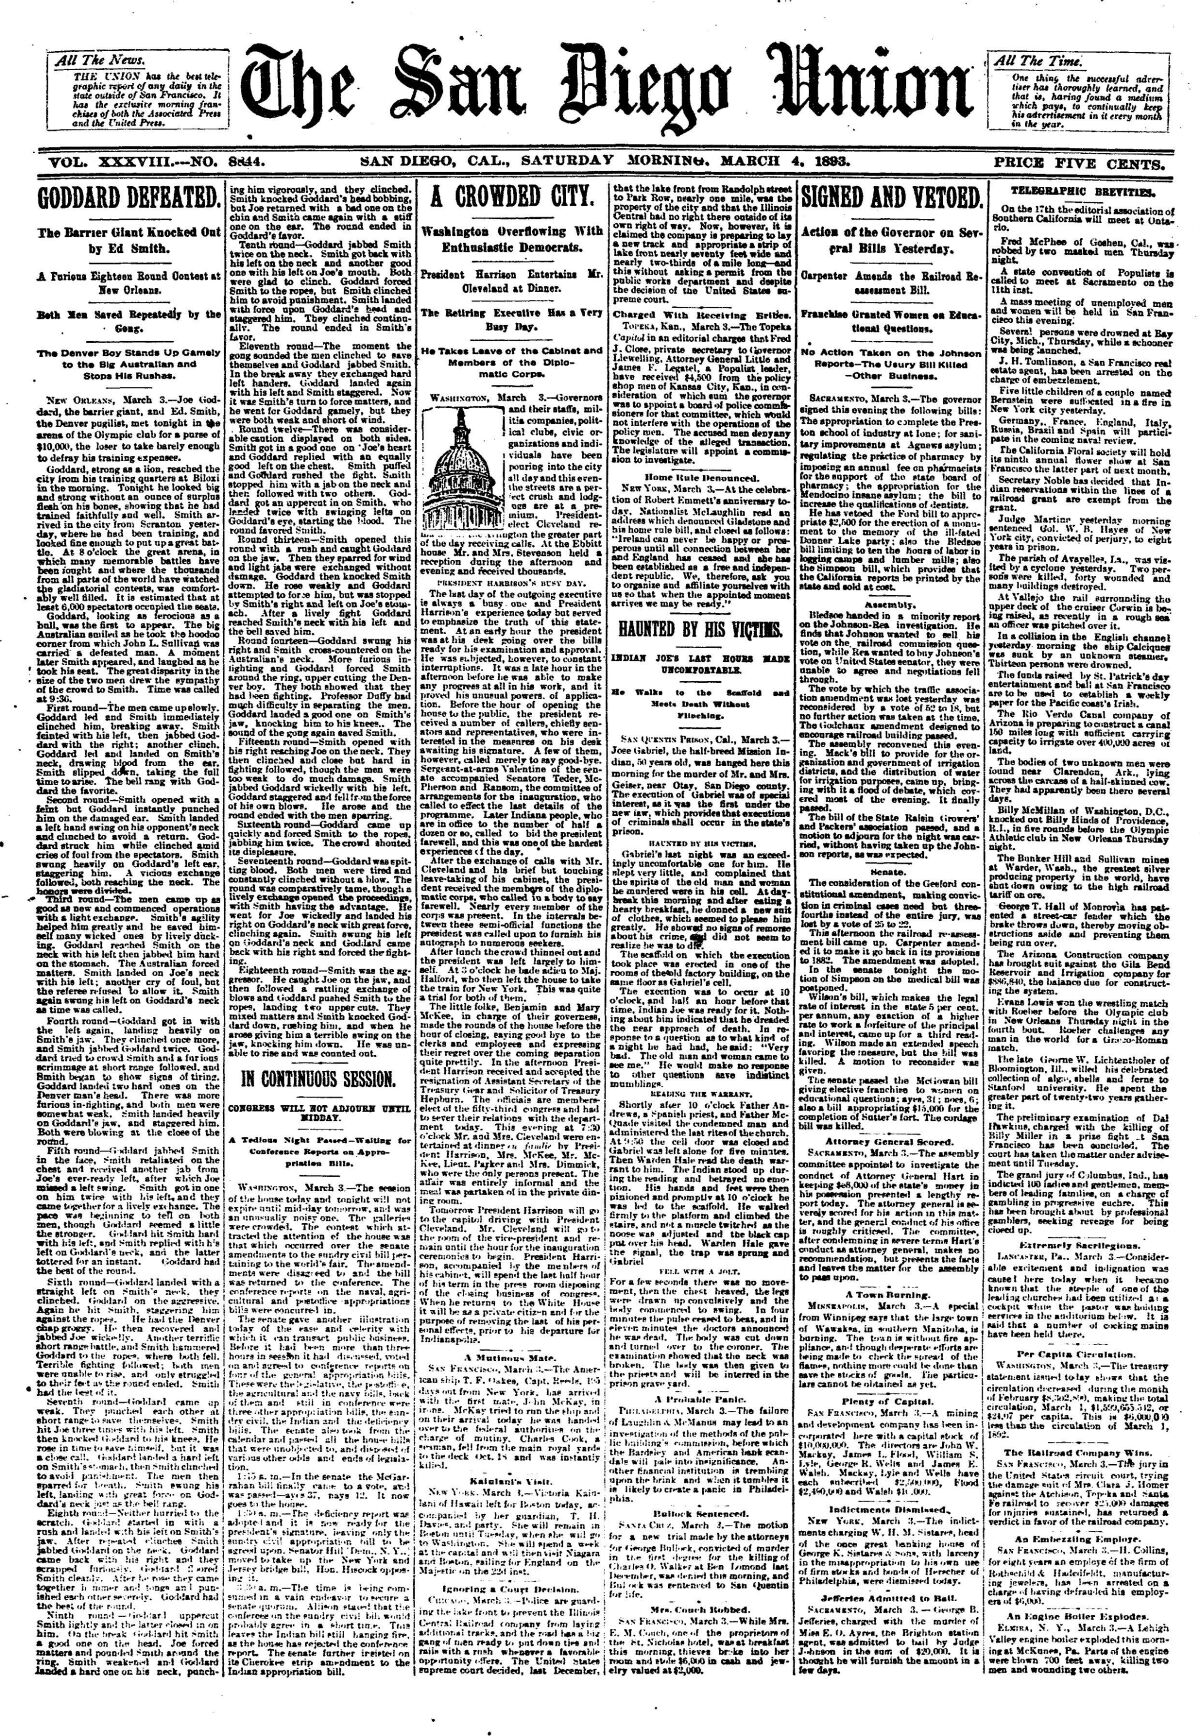 Front page of The San Diego Union, March 4, 1893.